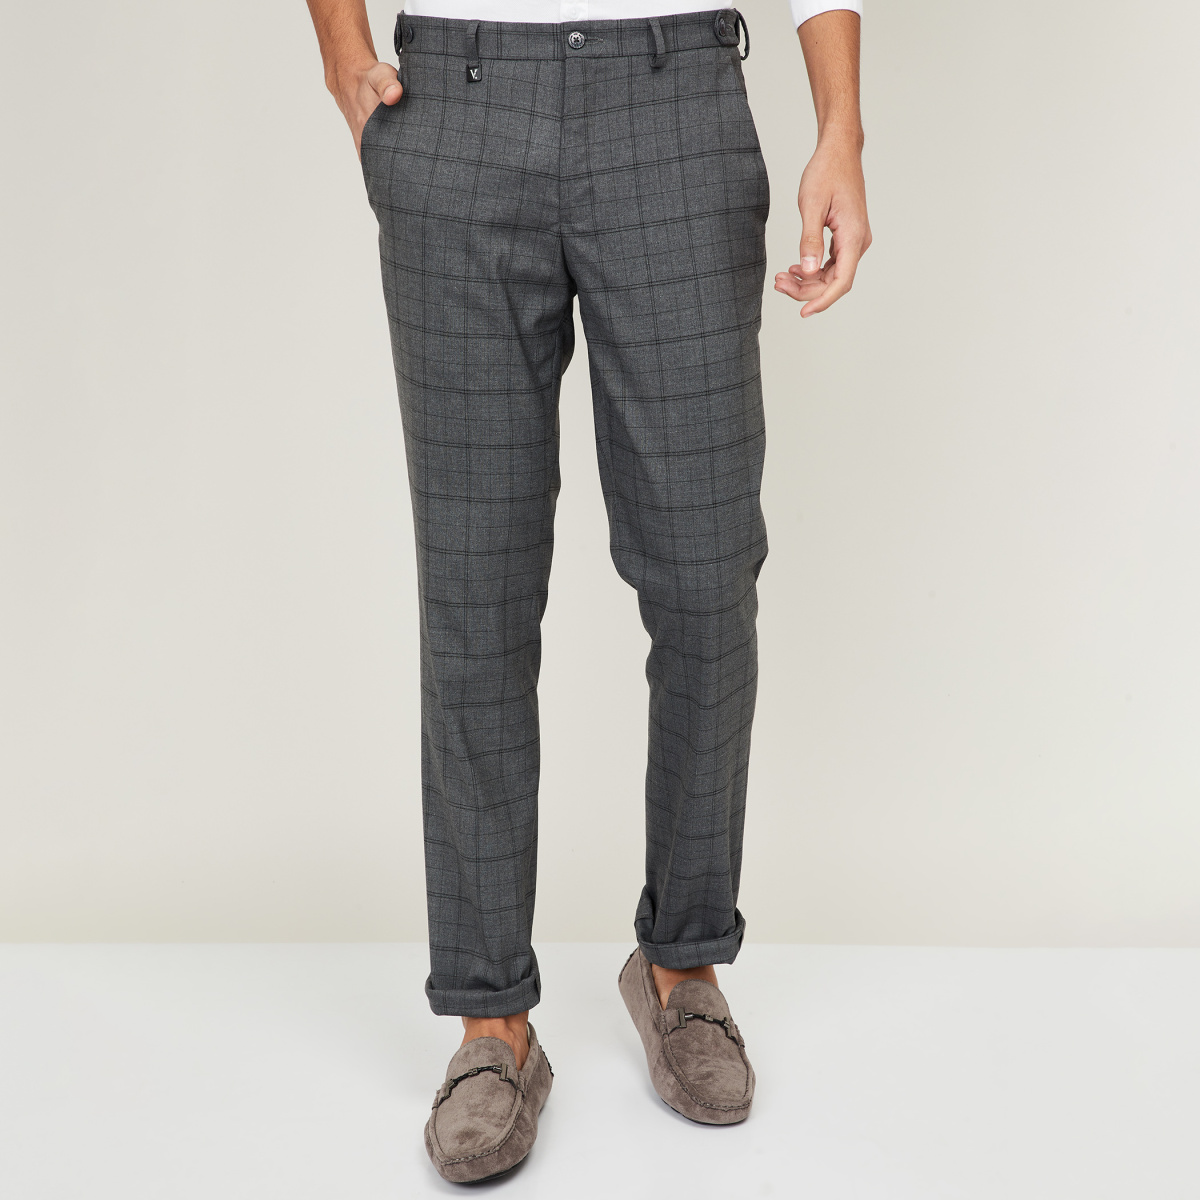 Mens Checked Trousers  Grey  Skinny Fit  boohooMAN